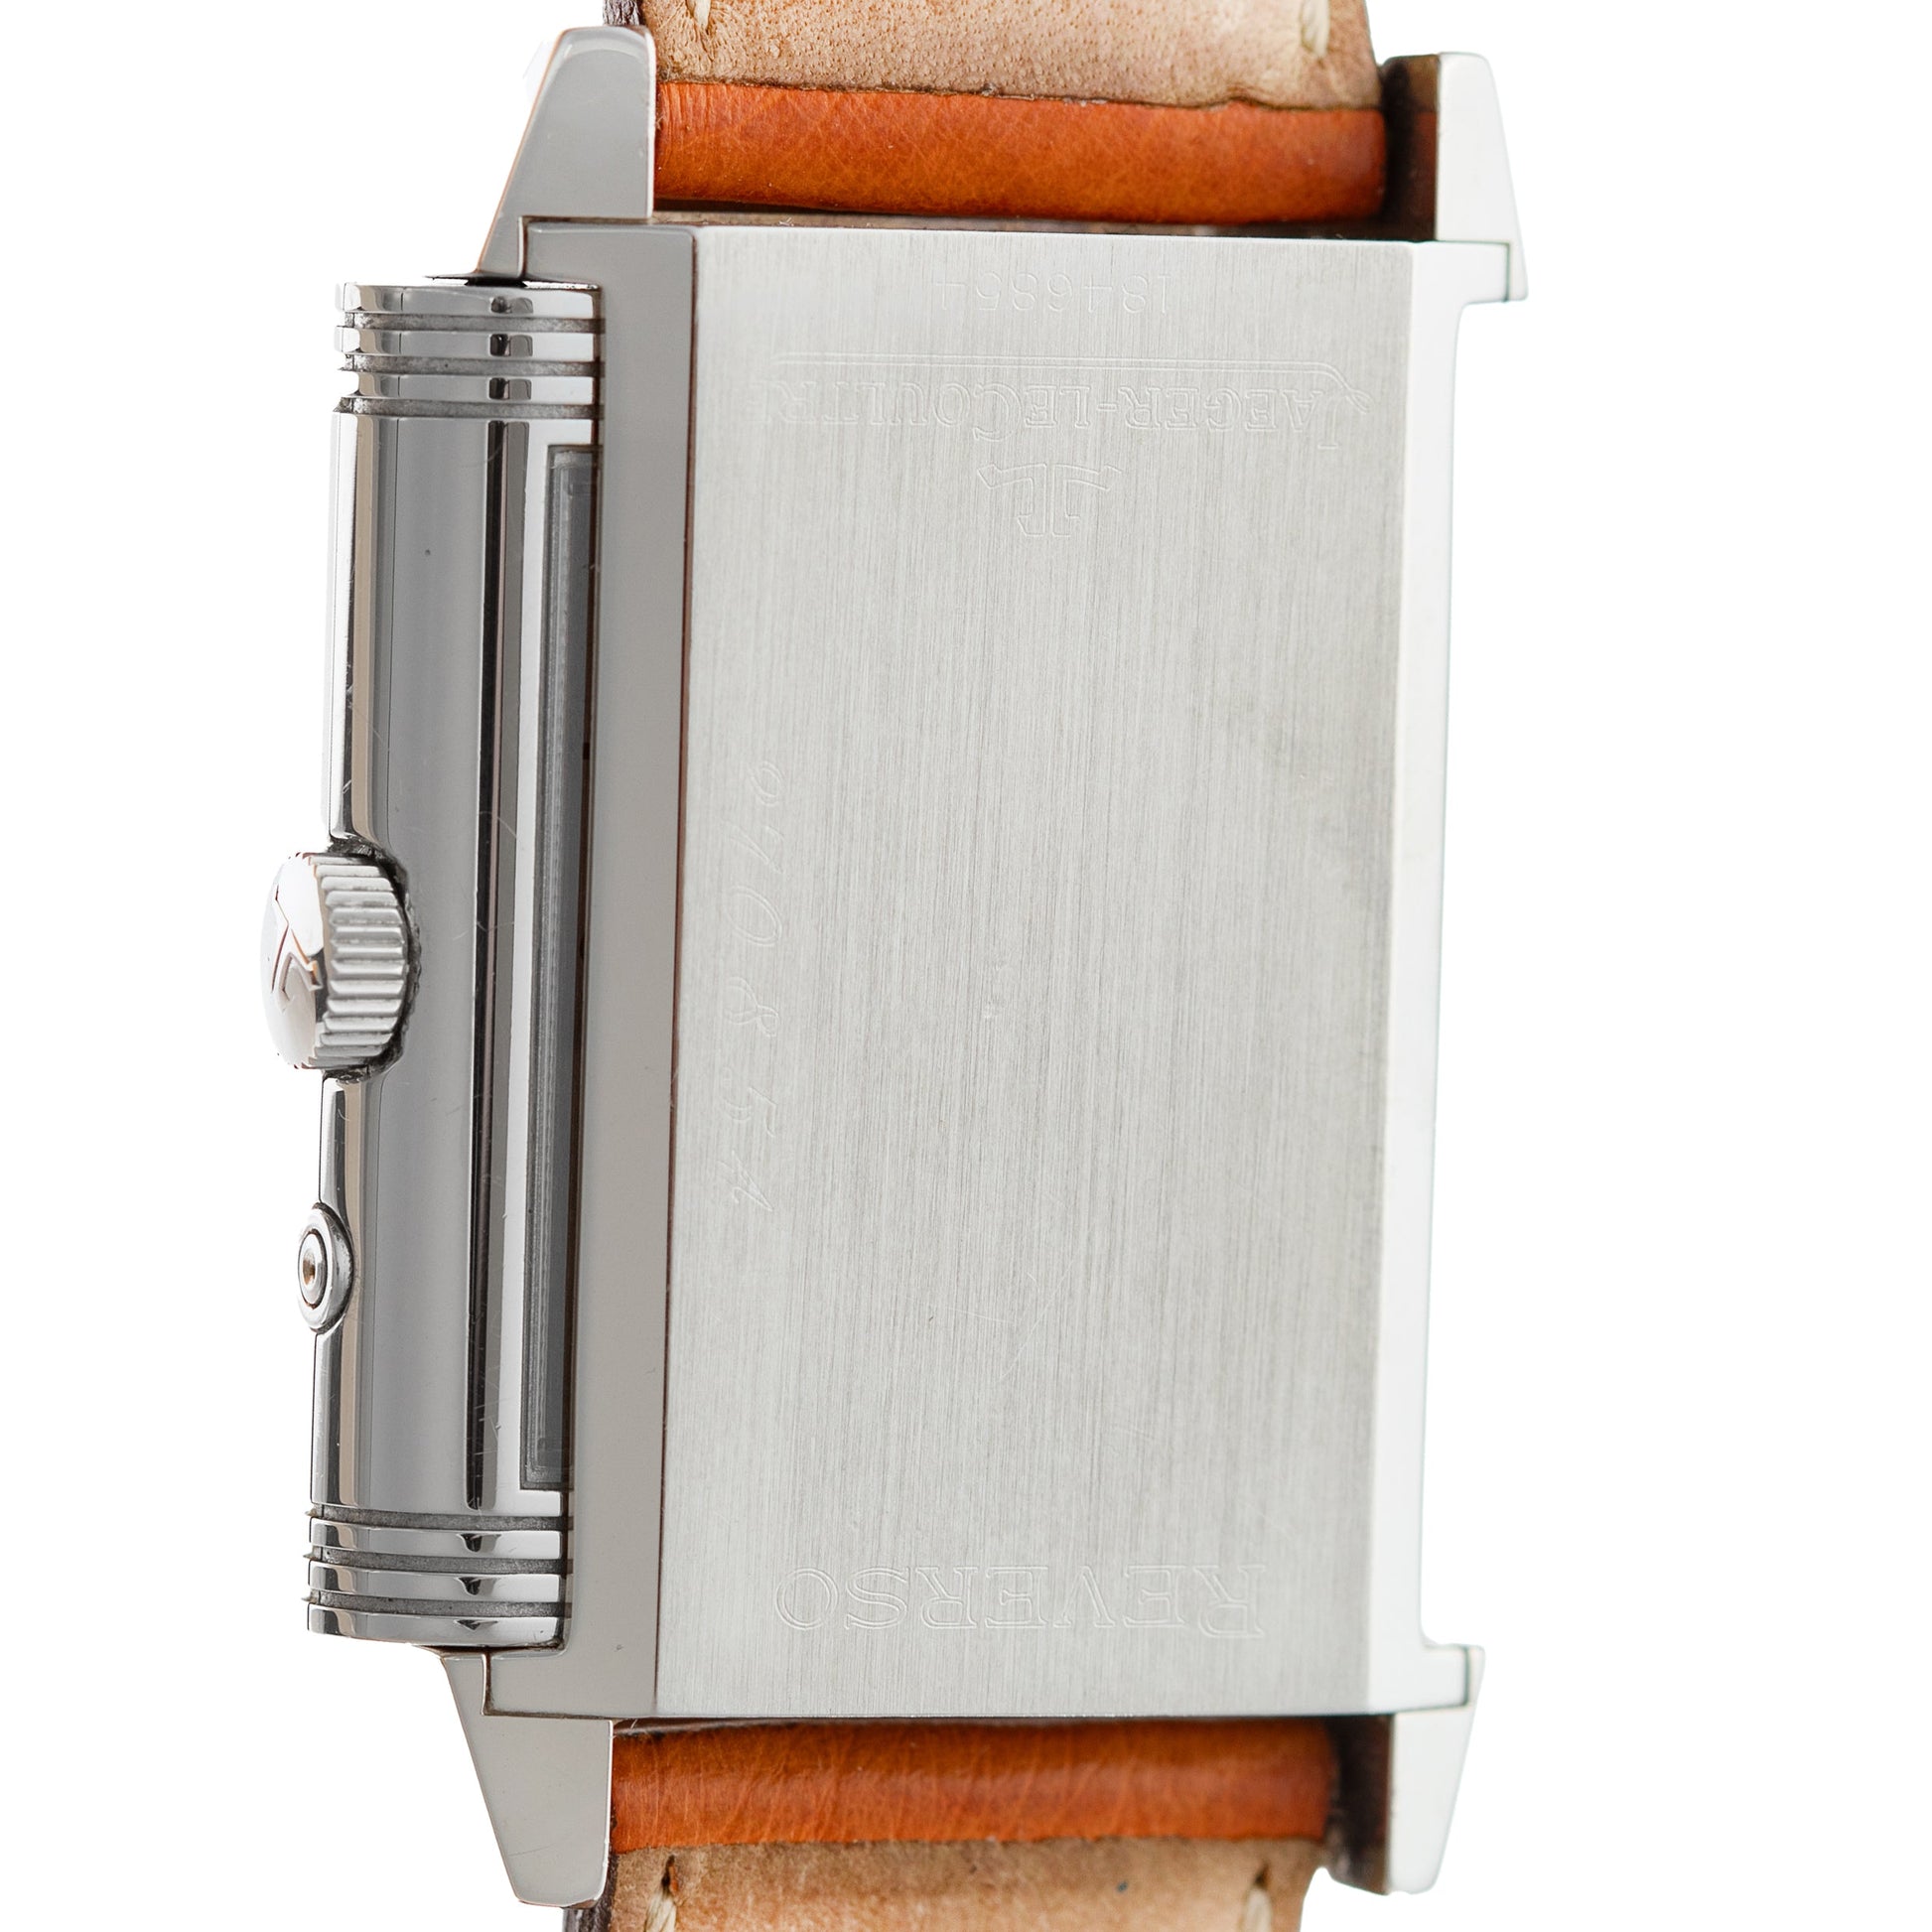 Jaeger-LeCoultre - Reverso Duoface Night & Day (270.8.54)